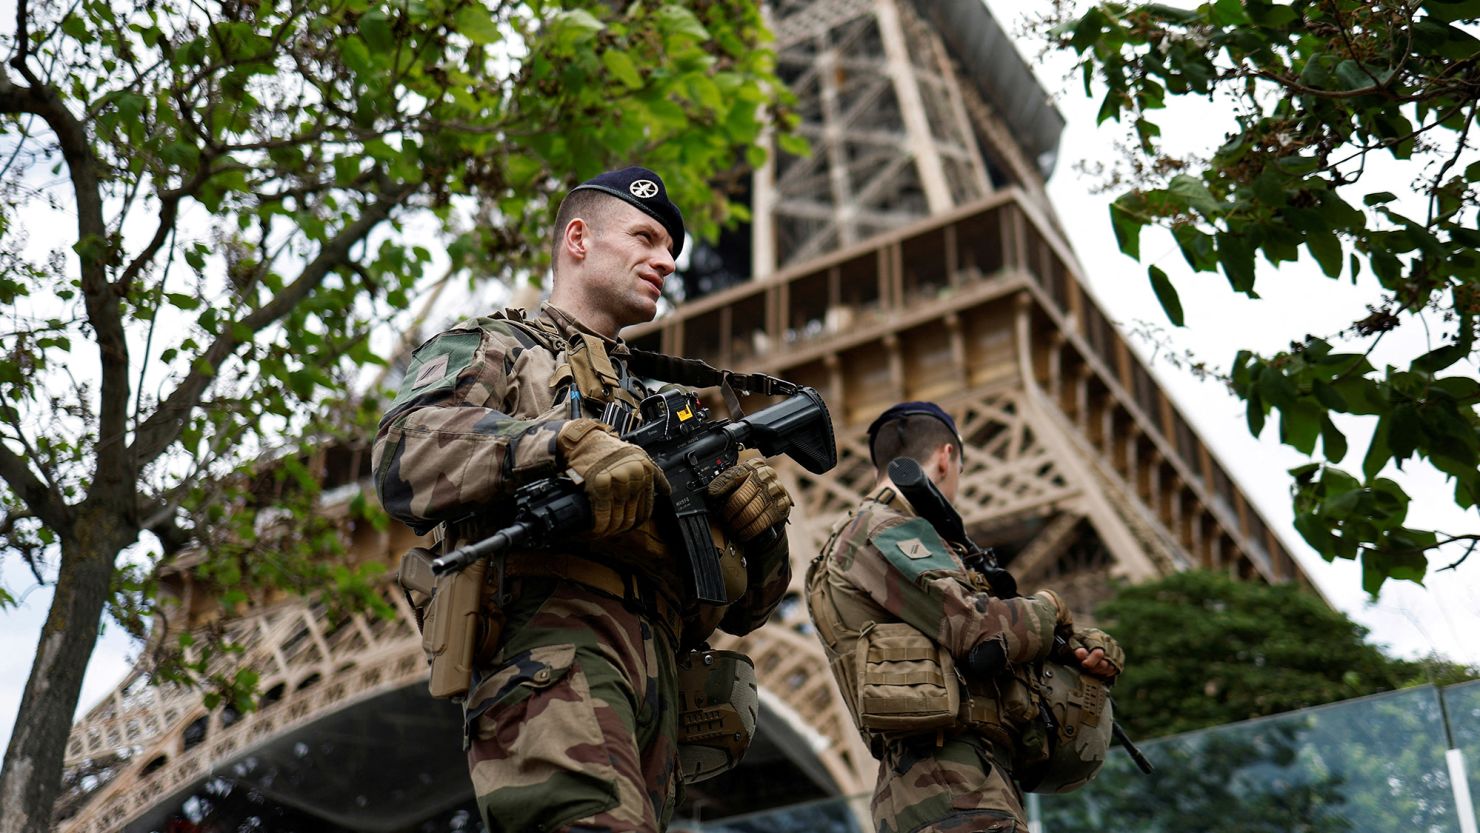 French soldiers patrol near the Eiffel Tower as part of the "Sentinelle" security plan in Paris.